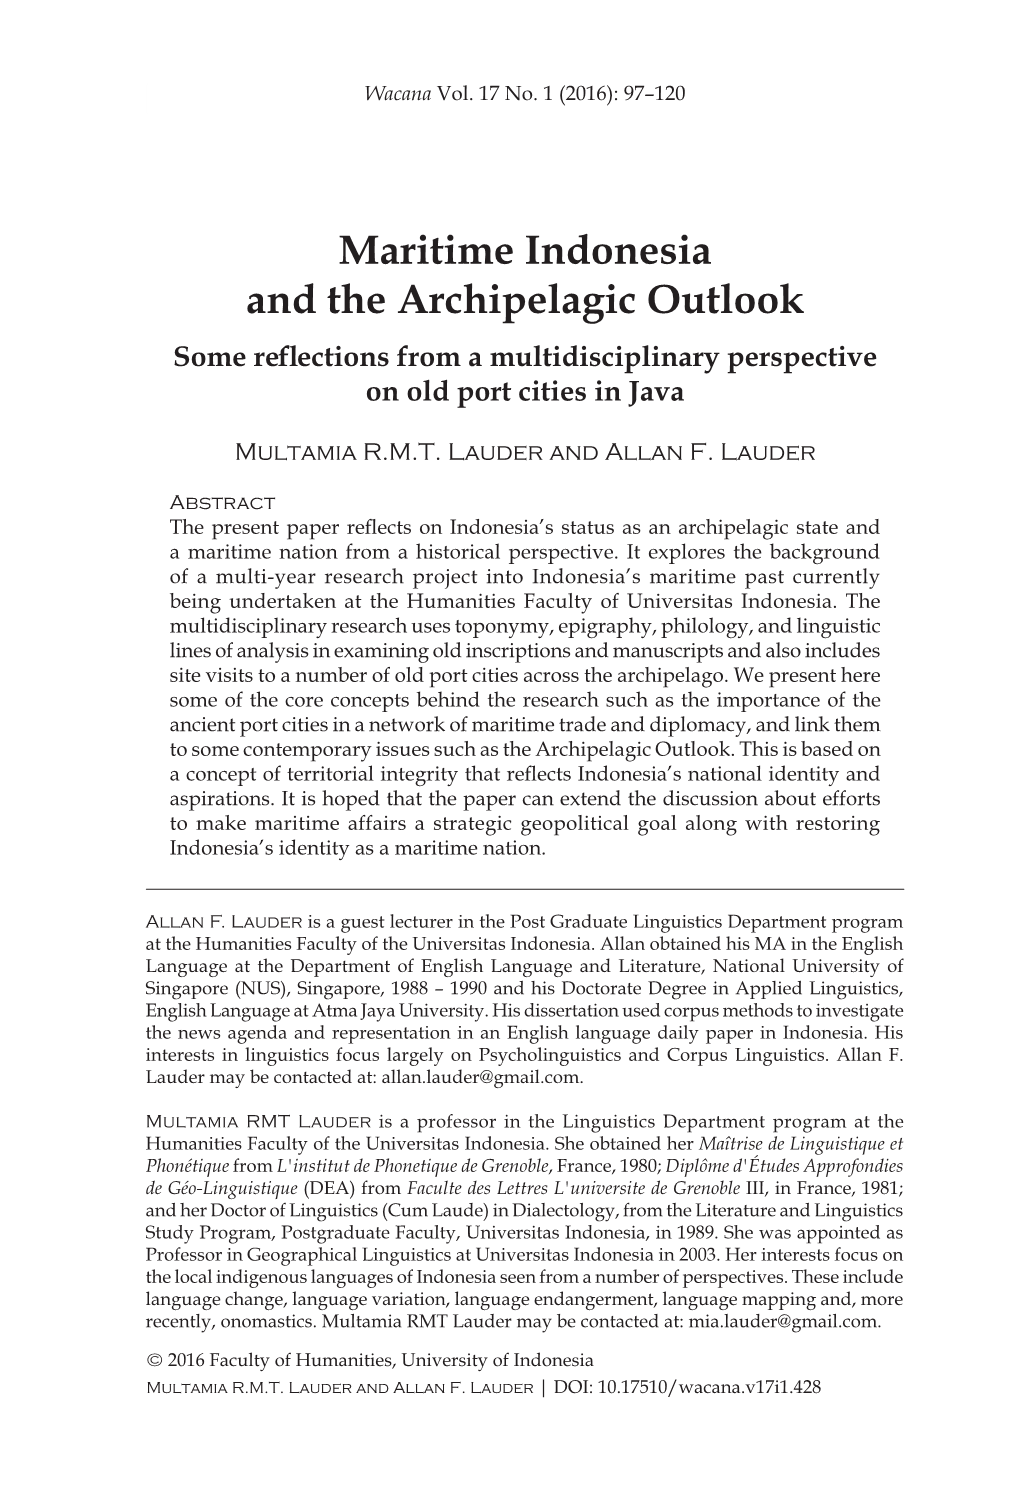 Maritime Indonesia and the Archipelagic Outlook Some Reflections from a Multidisciplinary Perspective on Old Port Cities in Java